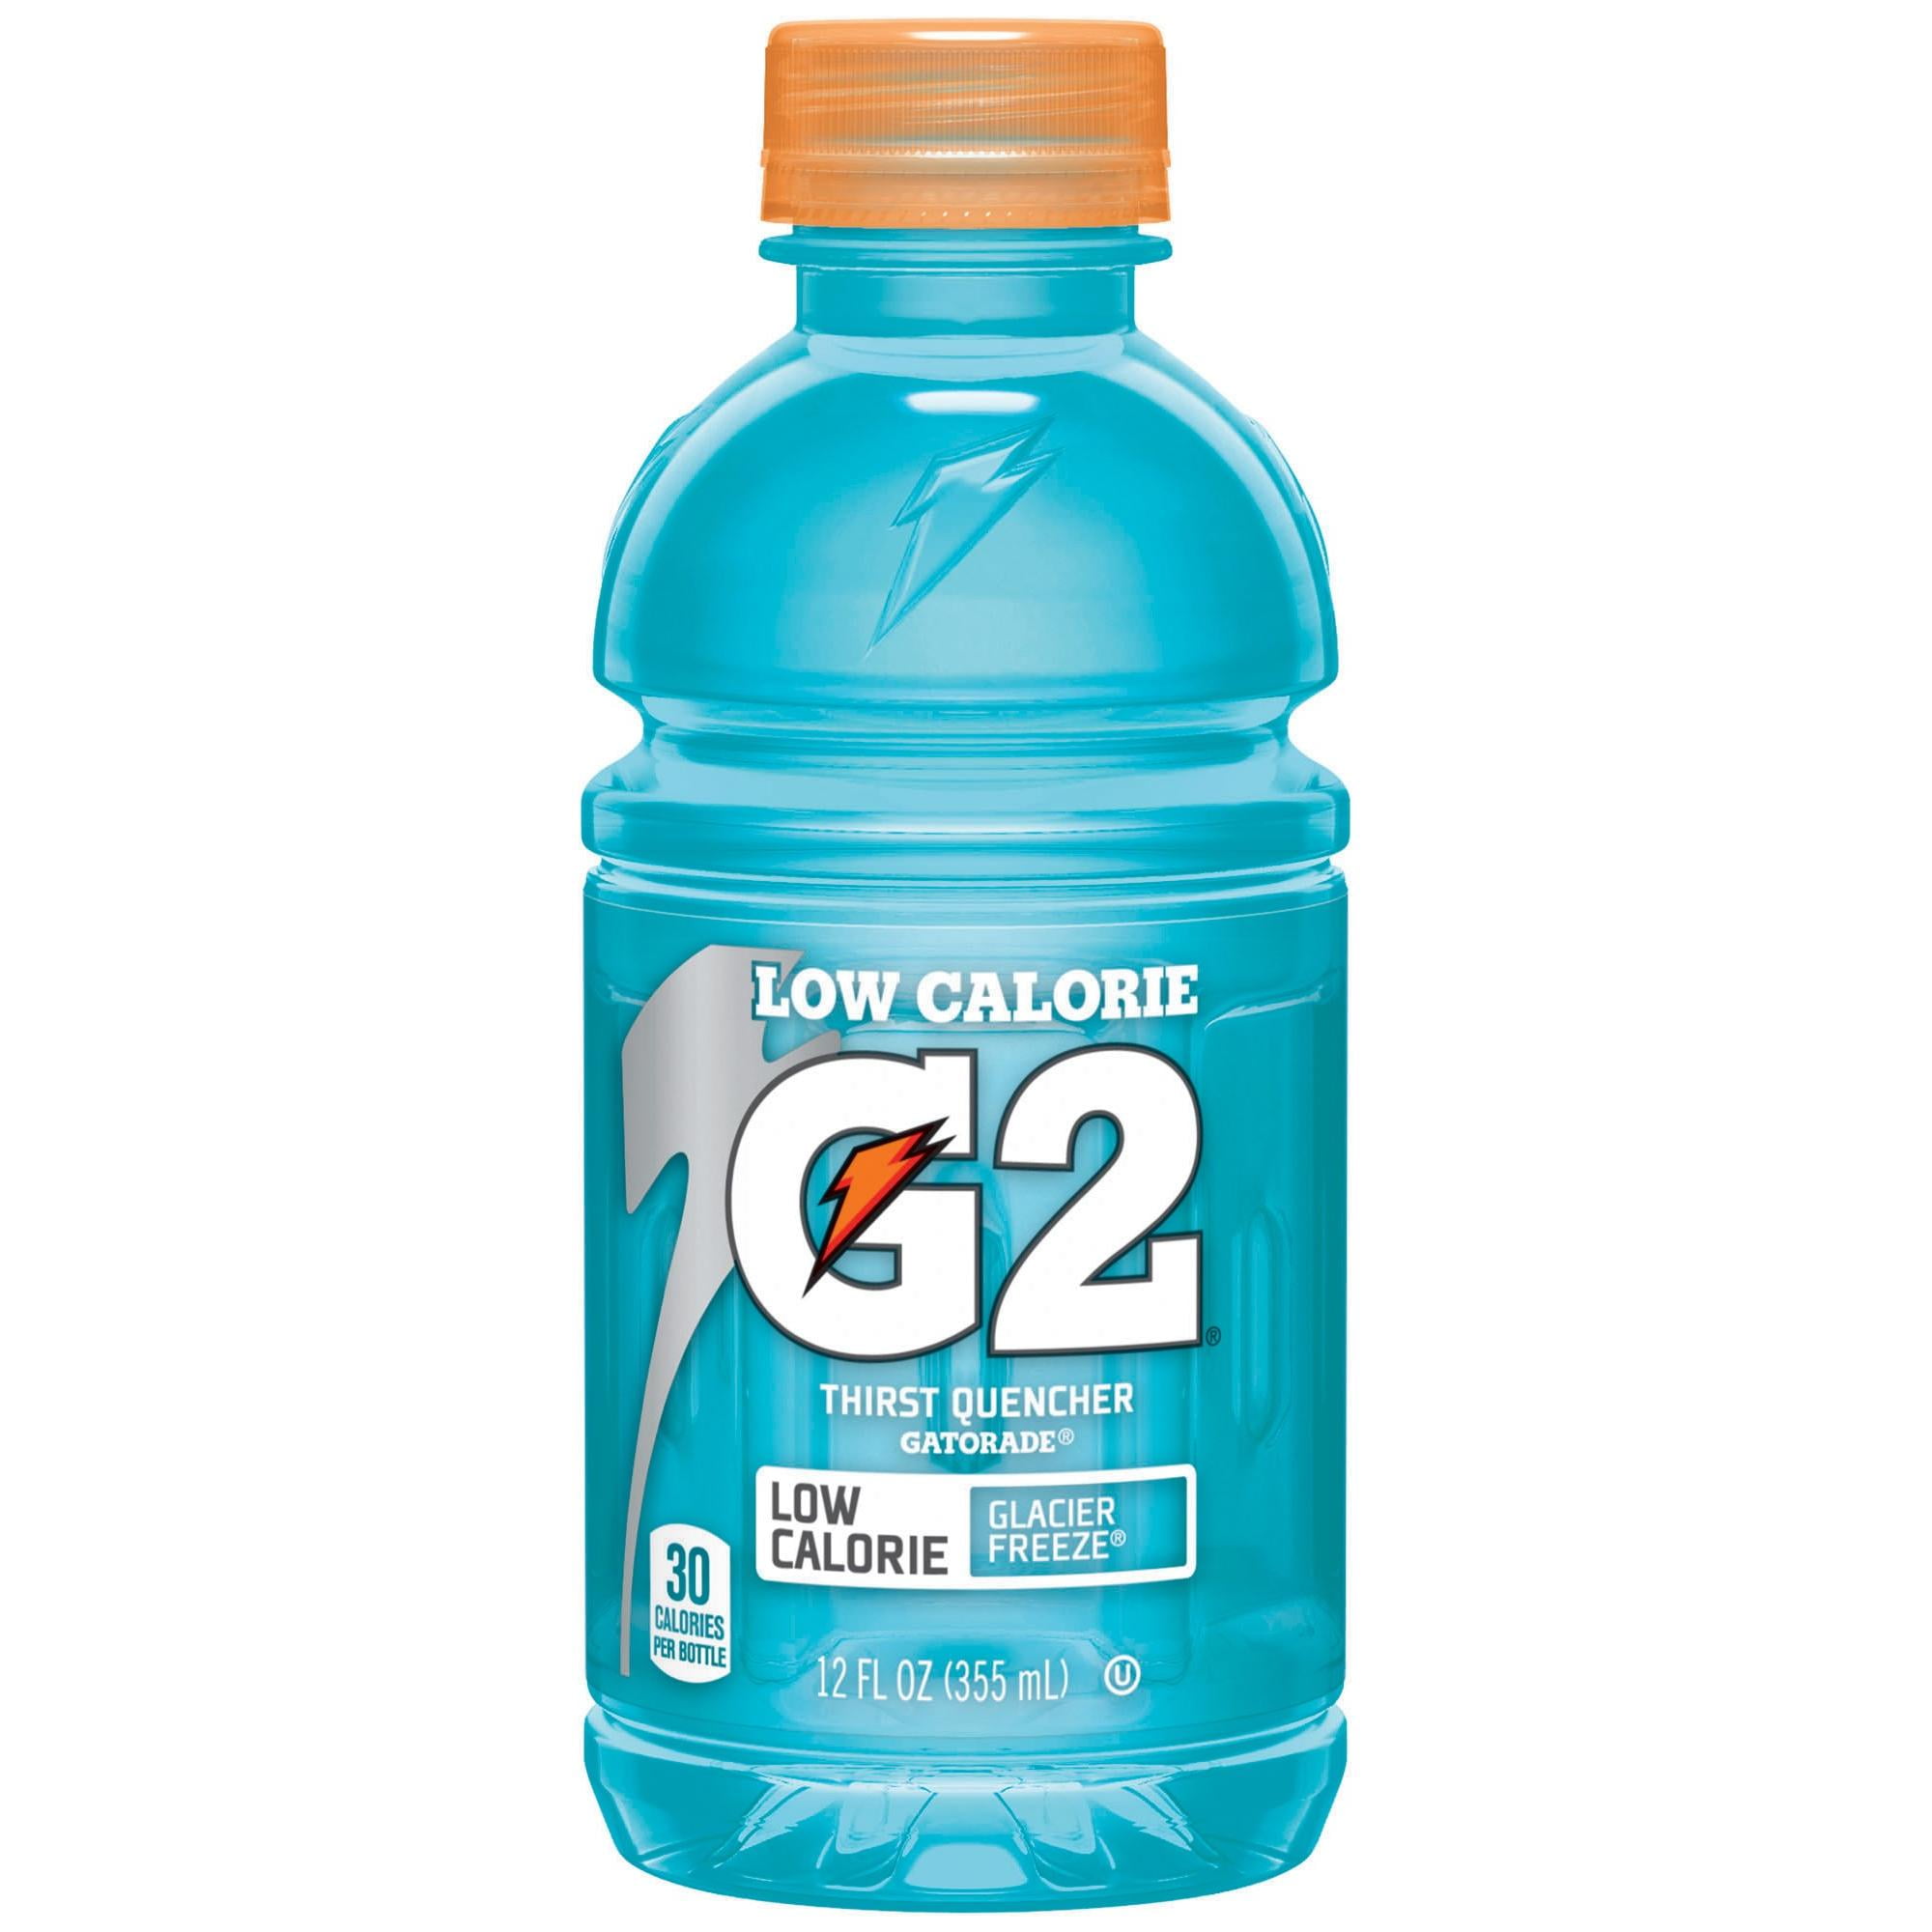 Download 31 Gatorade Bottle Label Template Labels For Your Ideas